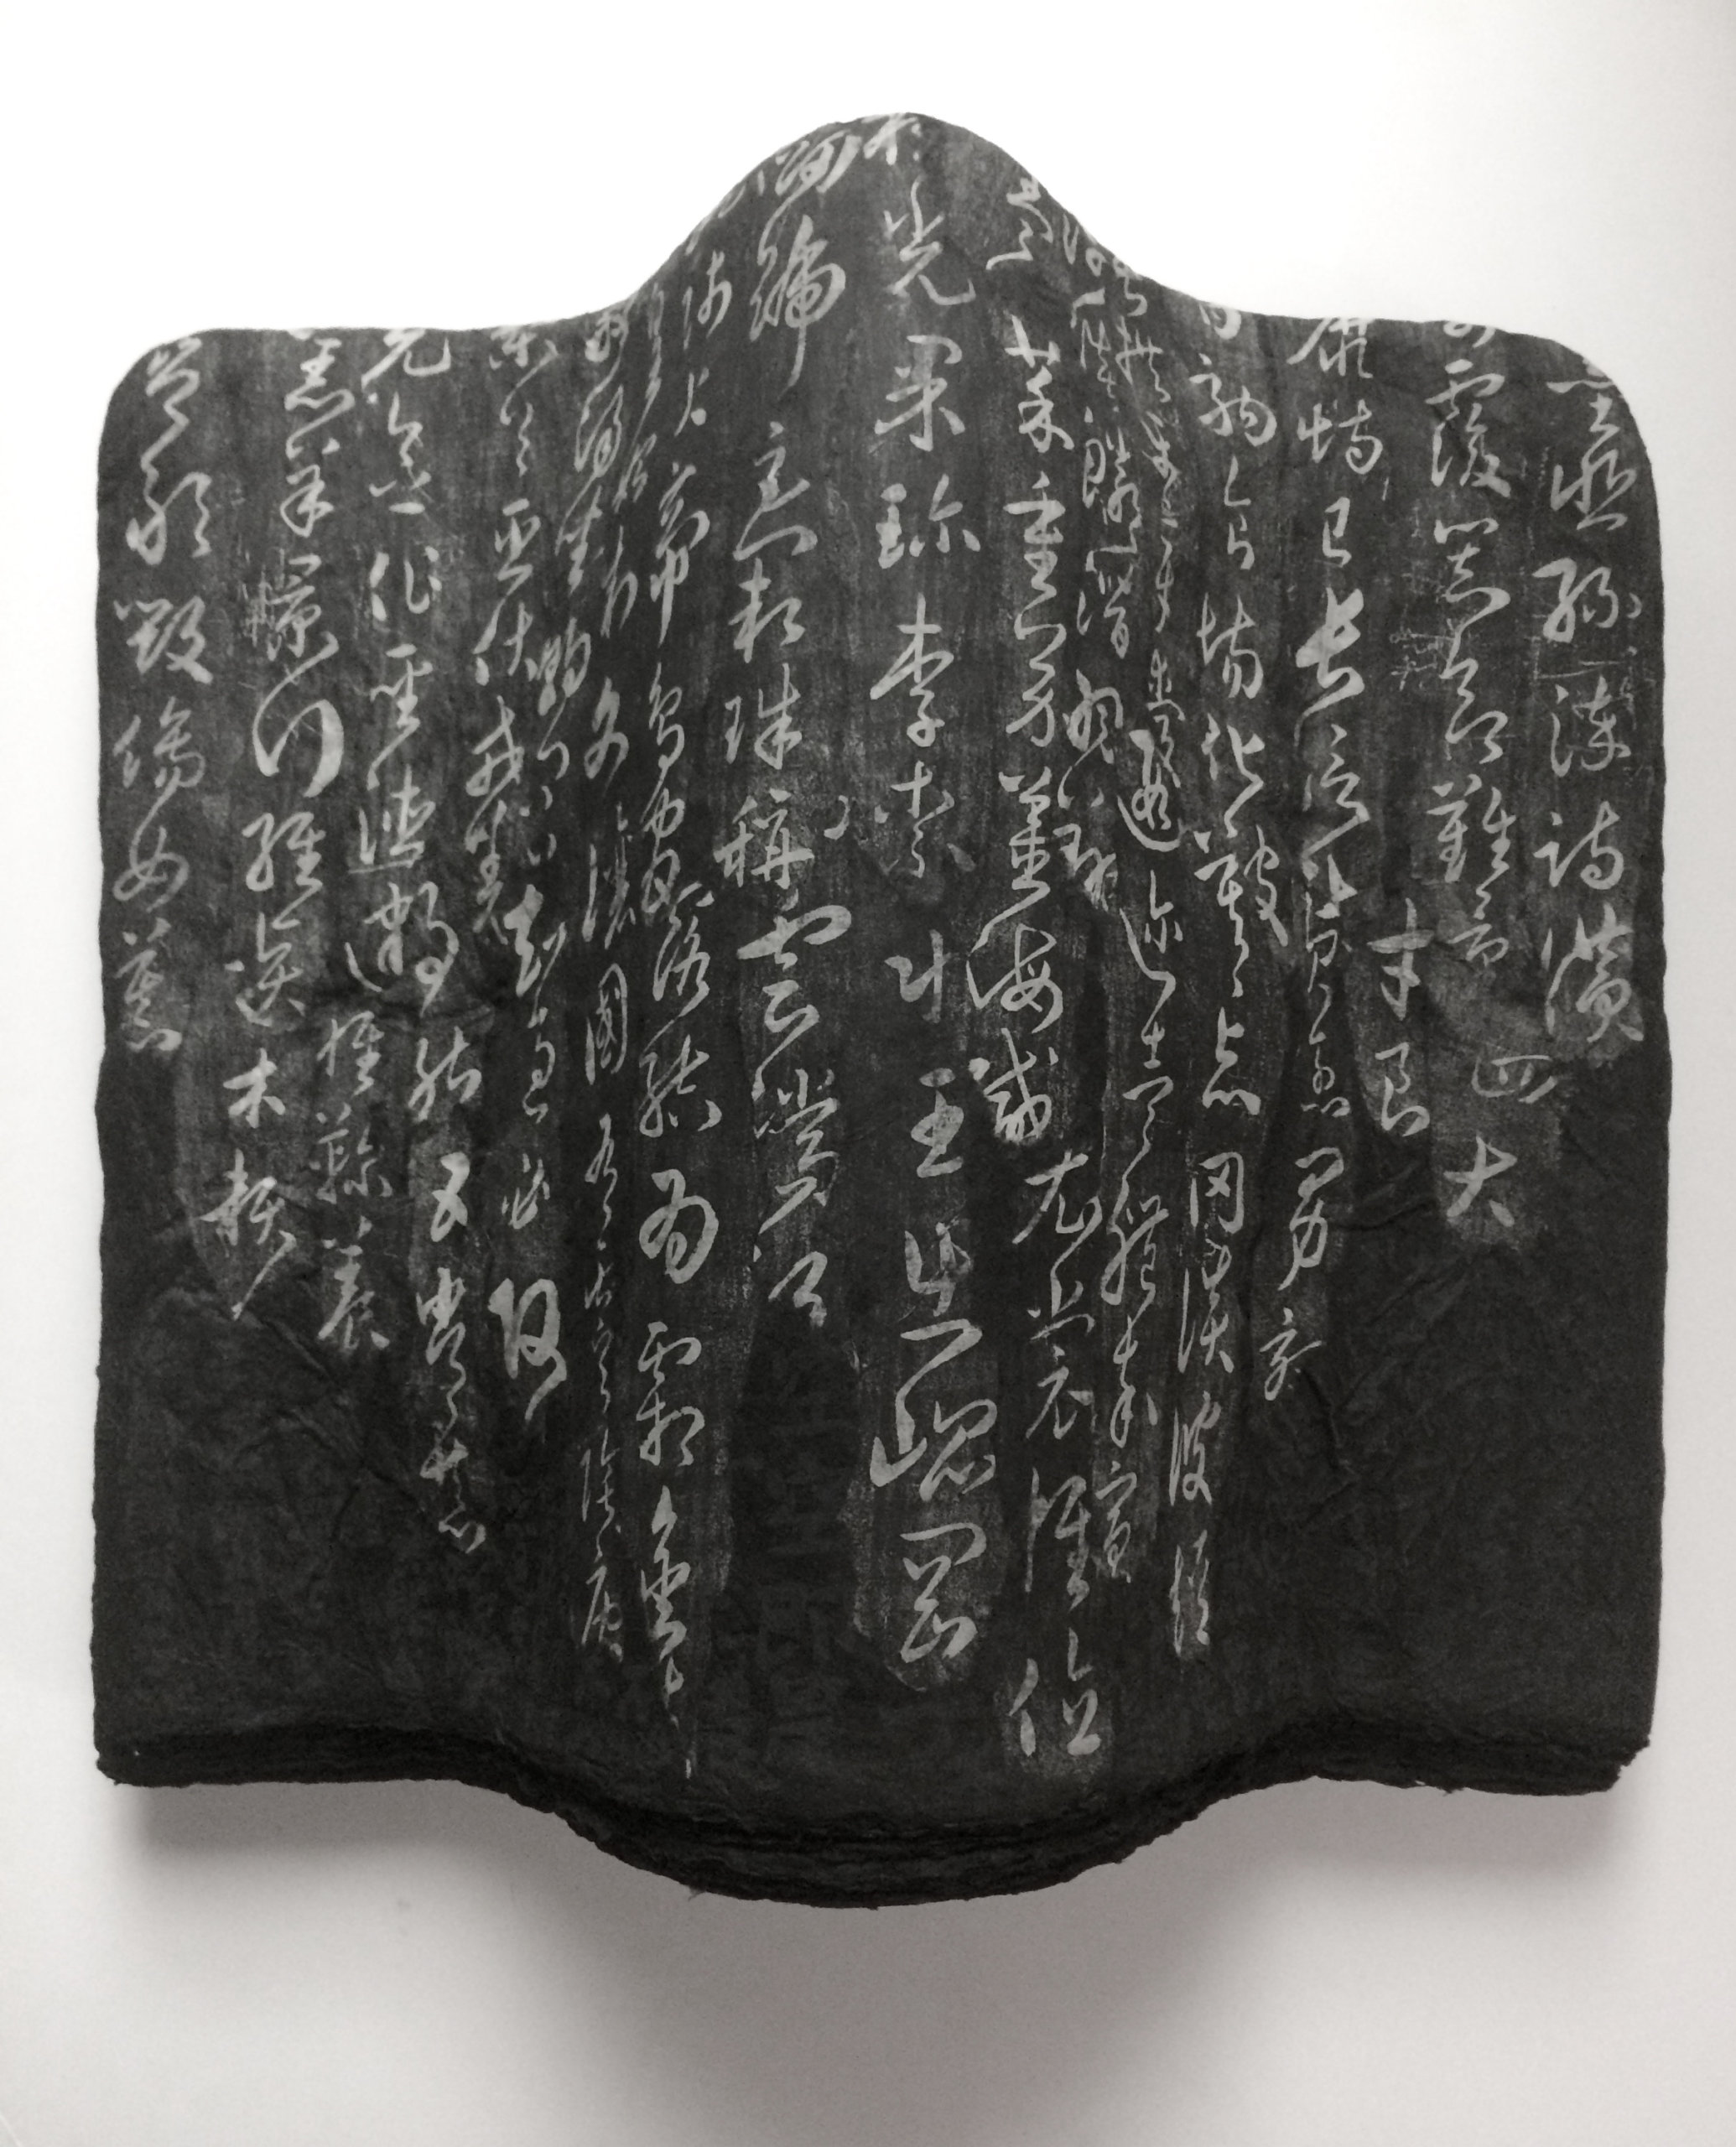 Yoshio Ikezaki, "The Earth Breathes BS 705," 2005; handmade mulberry paper with sumi ink